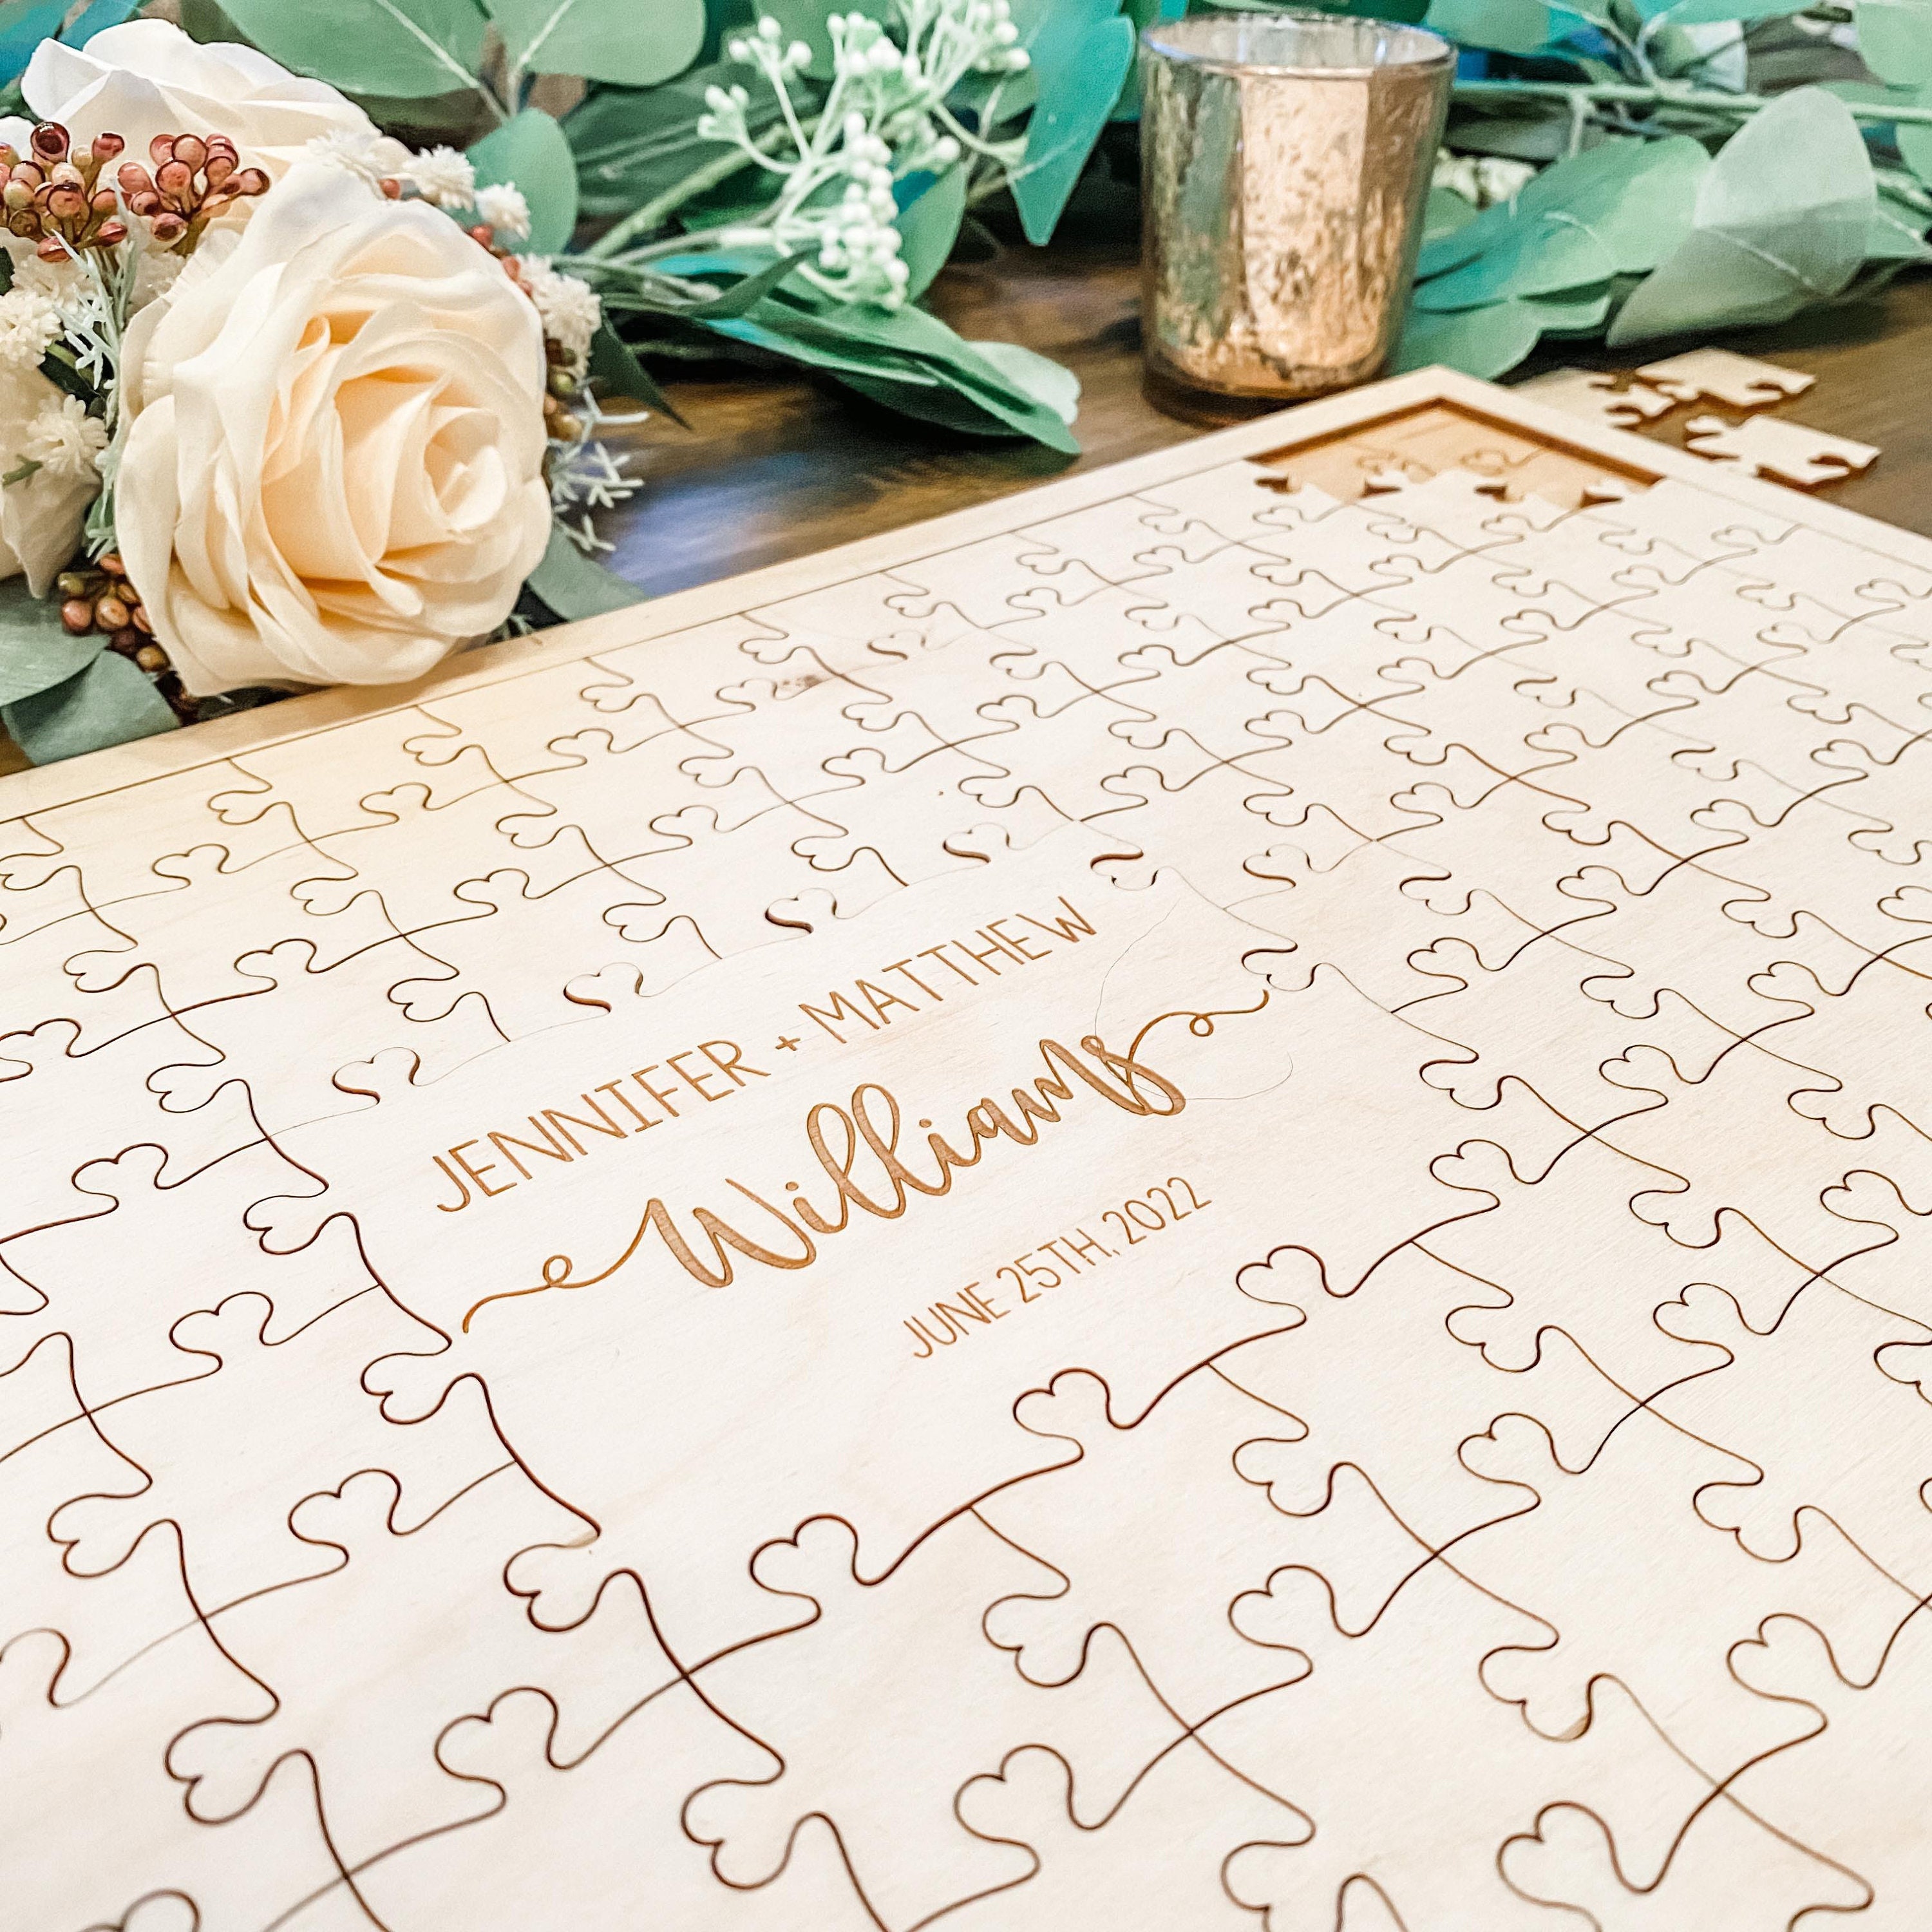 Puzzle Guest Book, Wooden Guest Book, Wedding Puzzle, Heart Guest Book, Guest Book Alternative, Puzzle Sign, 58-132 pieces, Jigsaw Puzzle